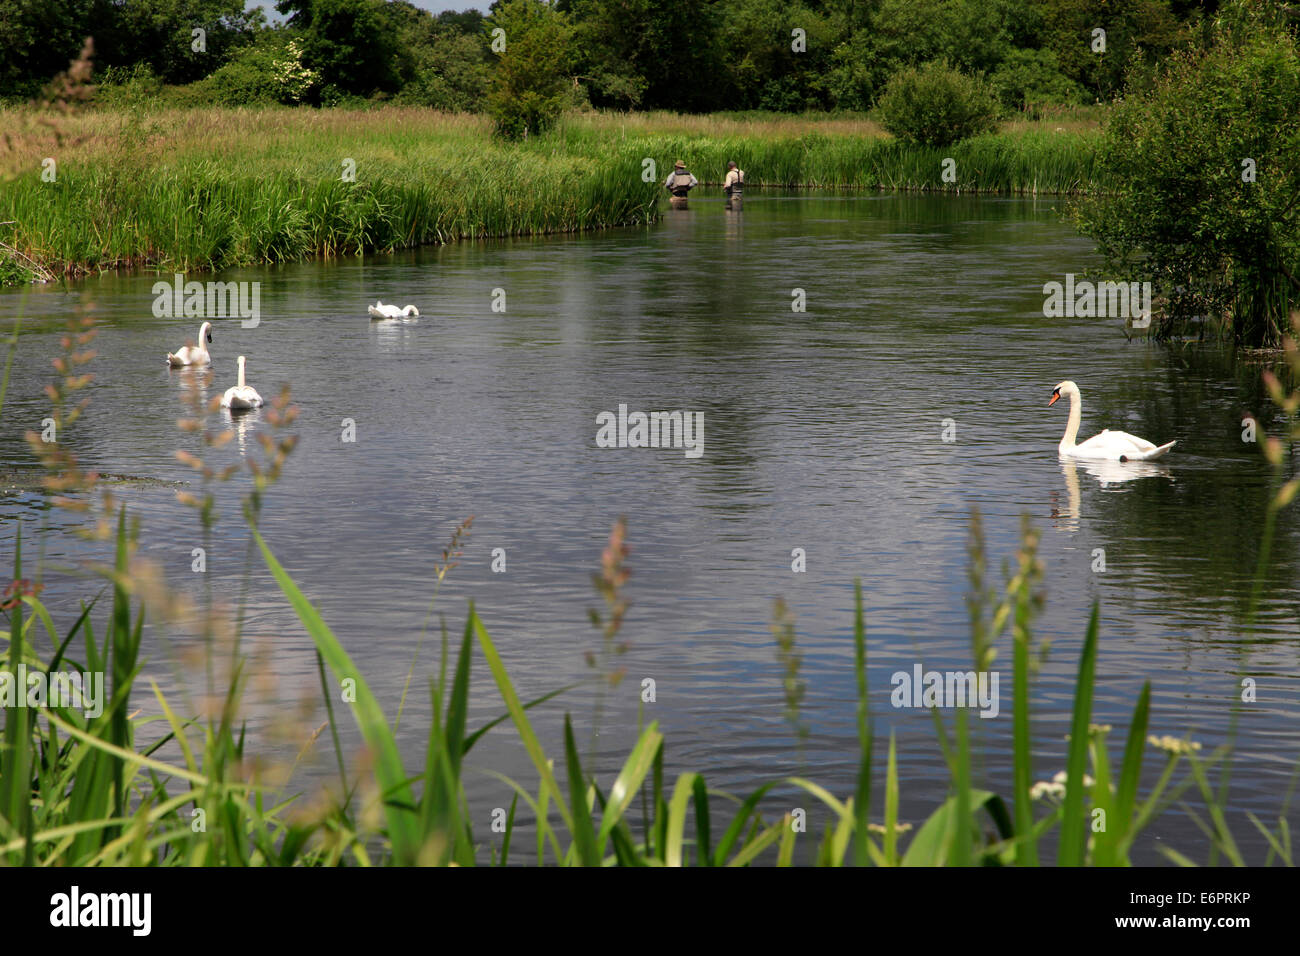 The River Wylye near the village of Great Wishford in Wiltshire, England. Stock Photo